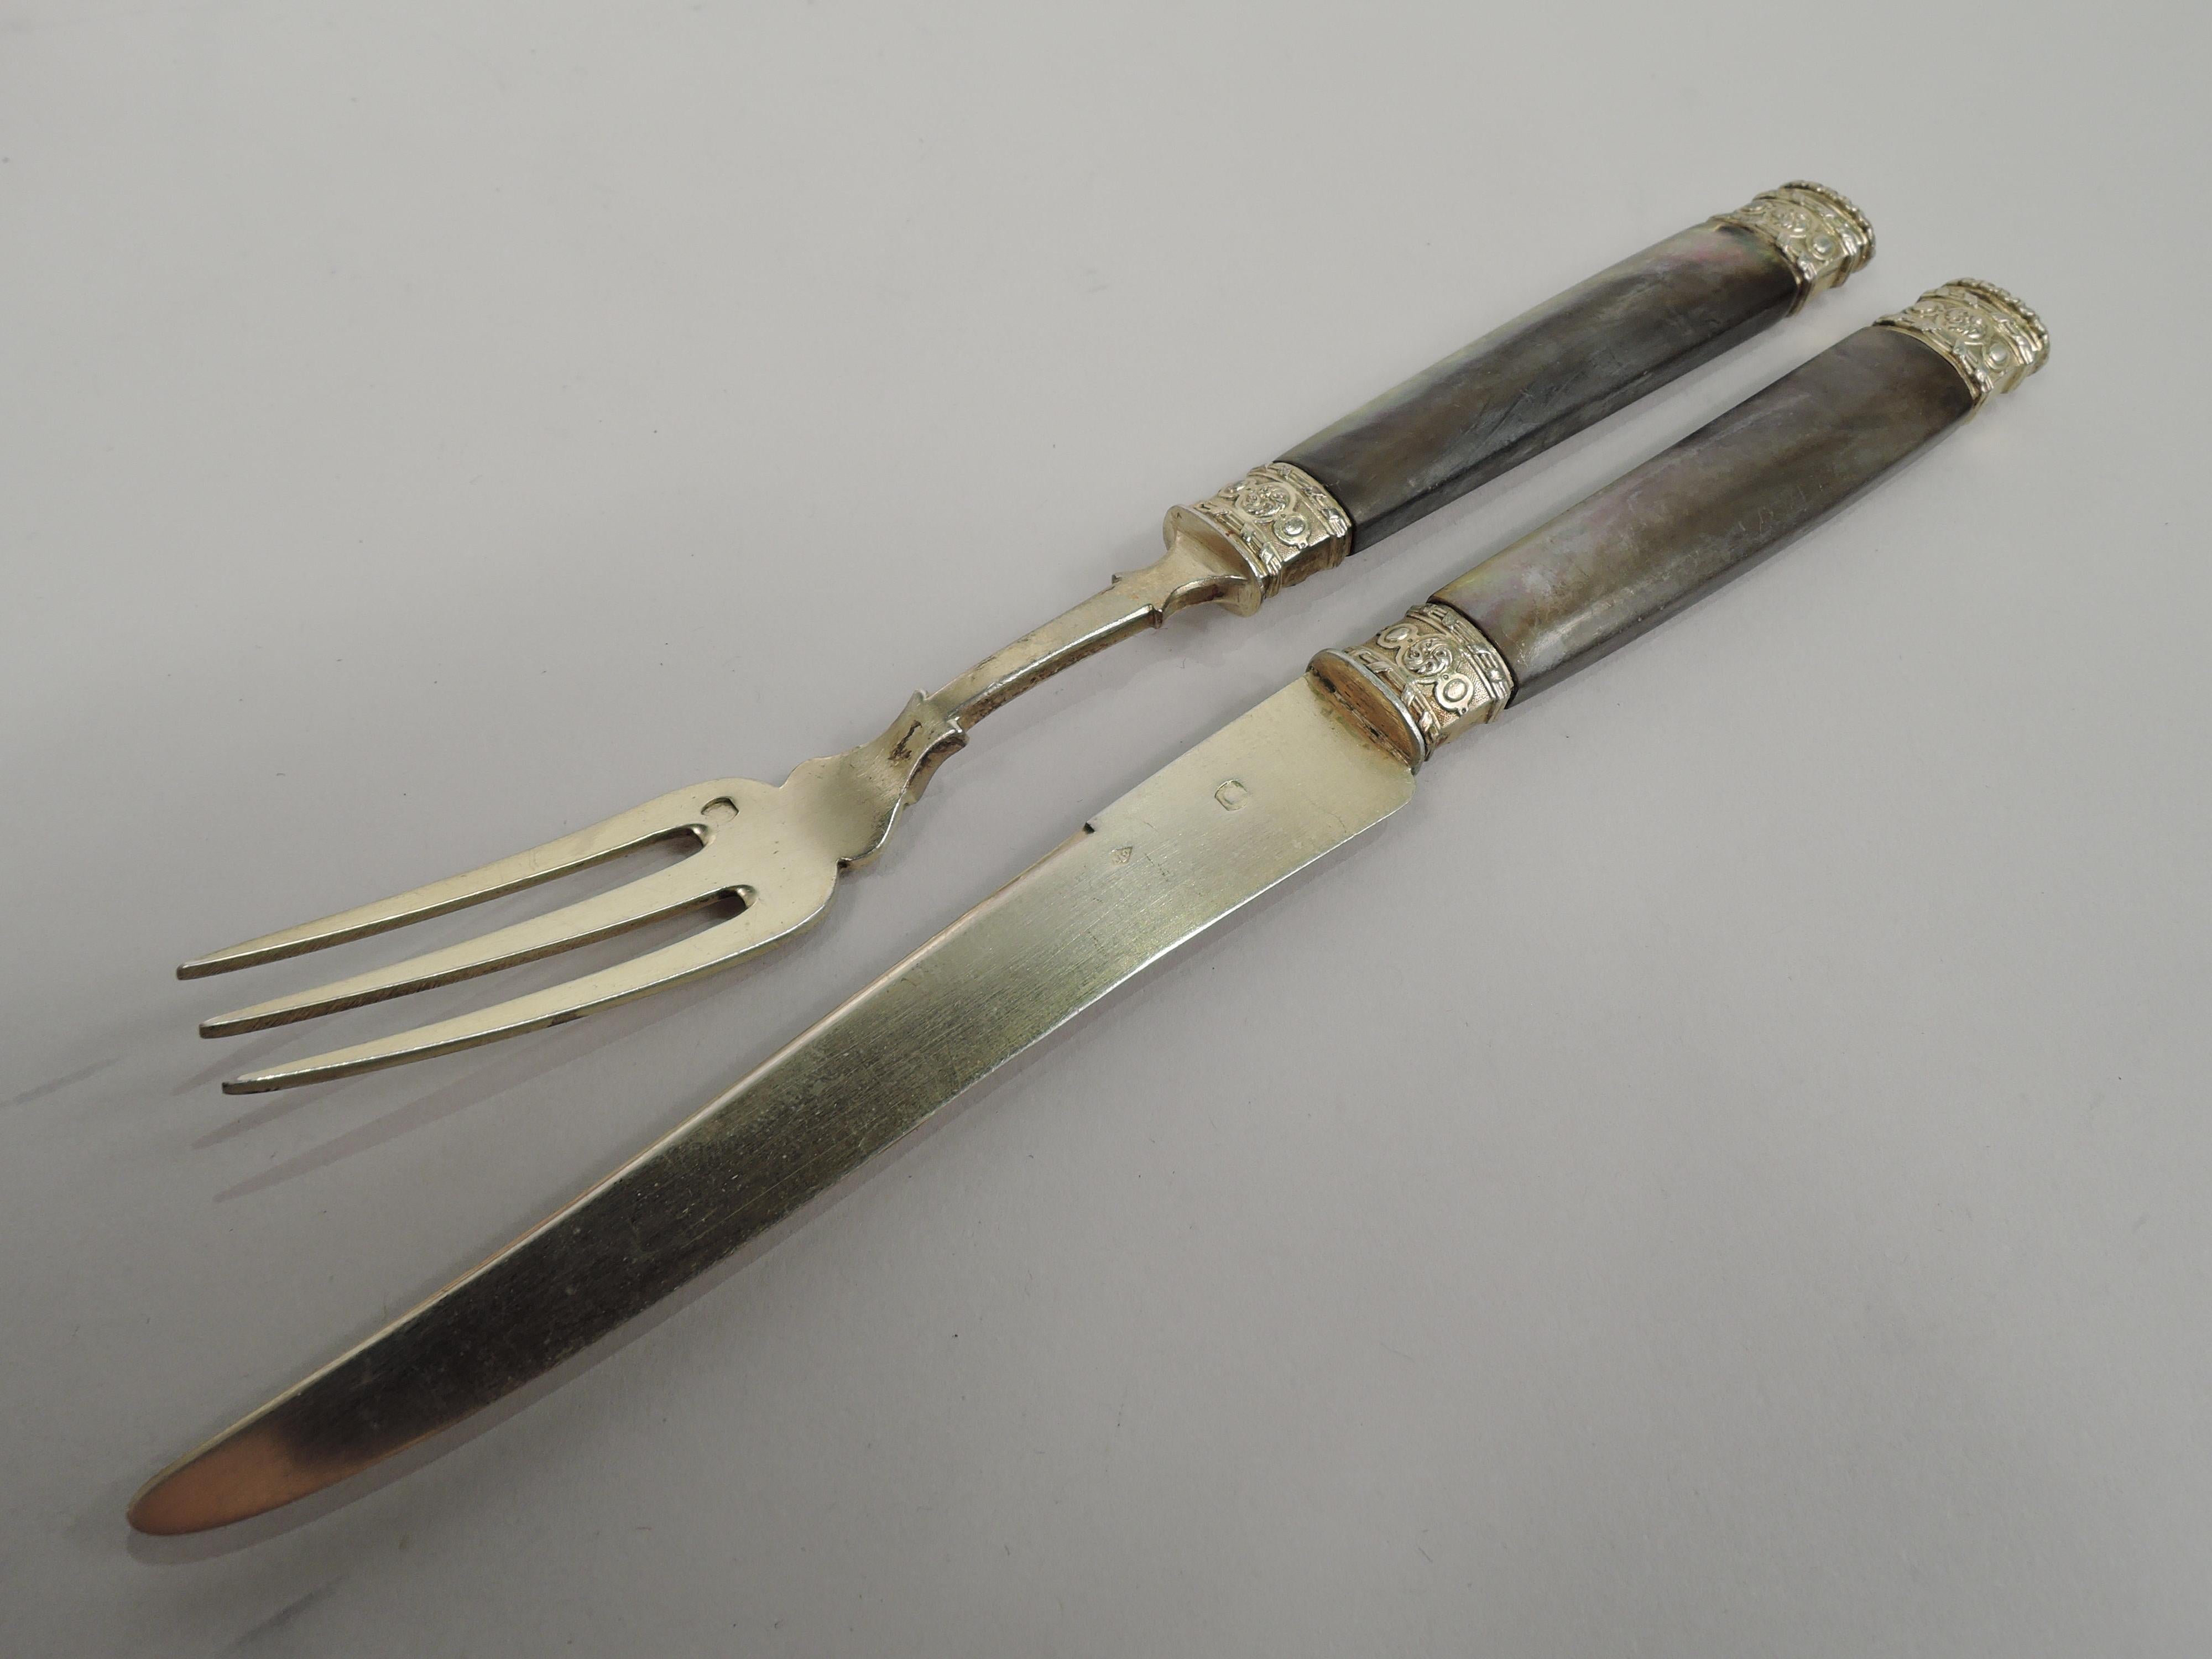 Turn-of-the-century Belle Epoque 950 silver and mother of pearl fruit set. Made by Gustave Veyrat in France. This set comprises 24 pieces with 12 forks and 12 knives. Each: Mother of pearl handle with ornamented mounts and lobed oval terminal with